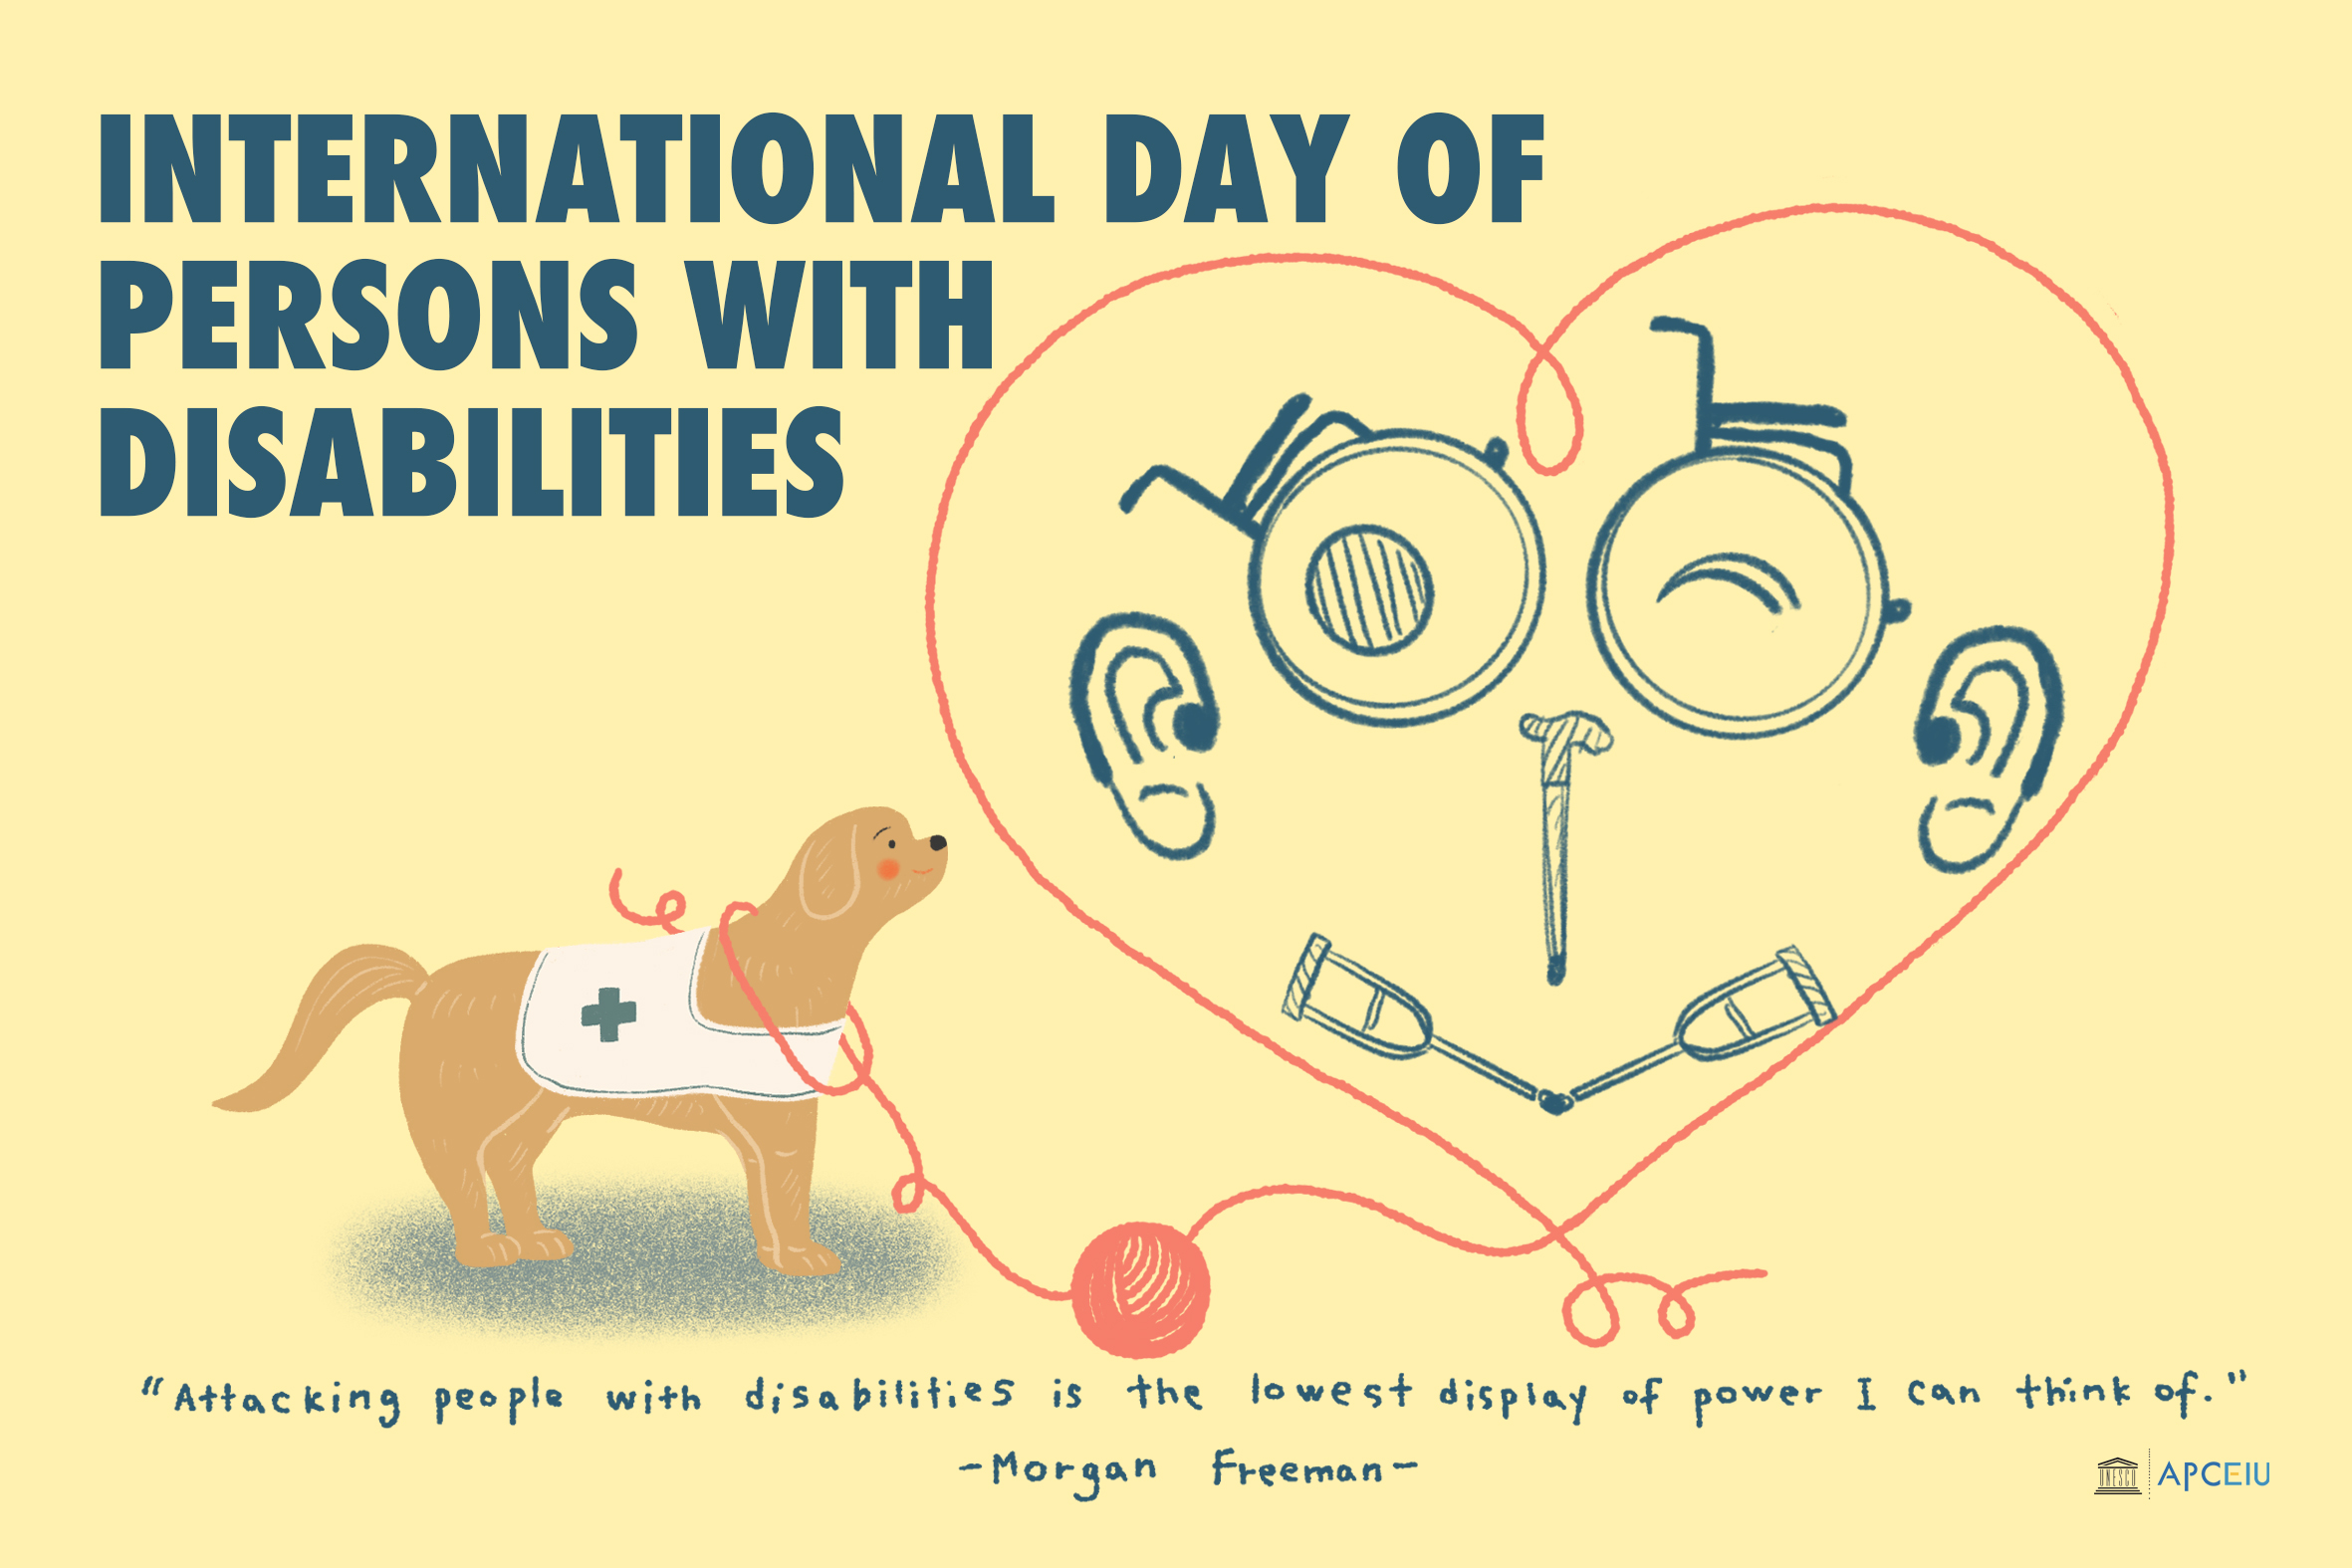 International day of persons with disabilities illustration.jpg